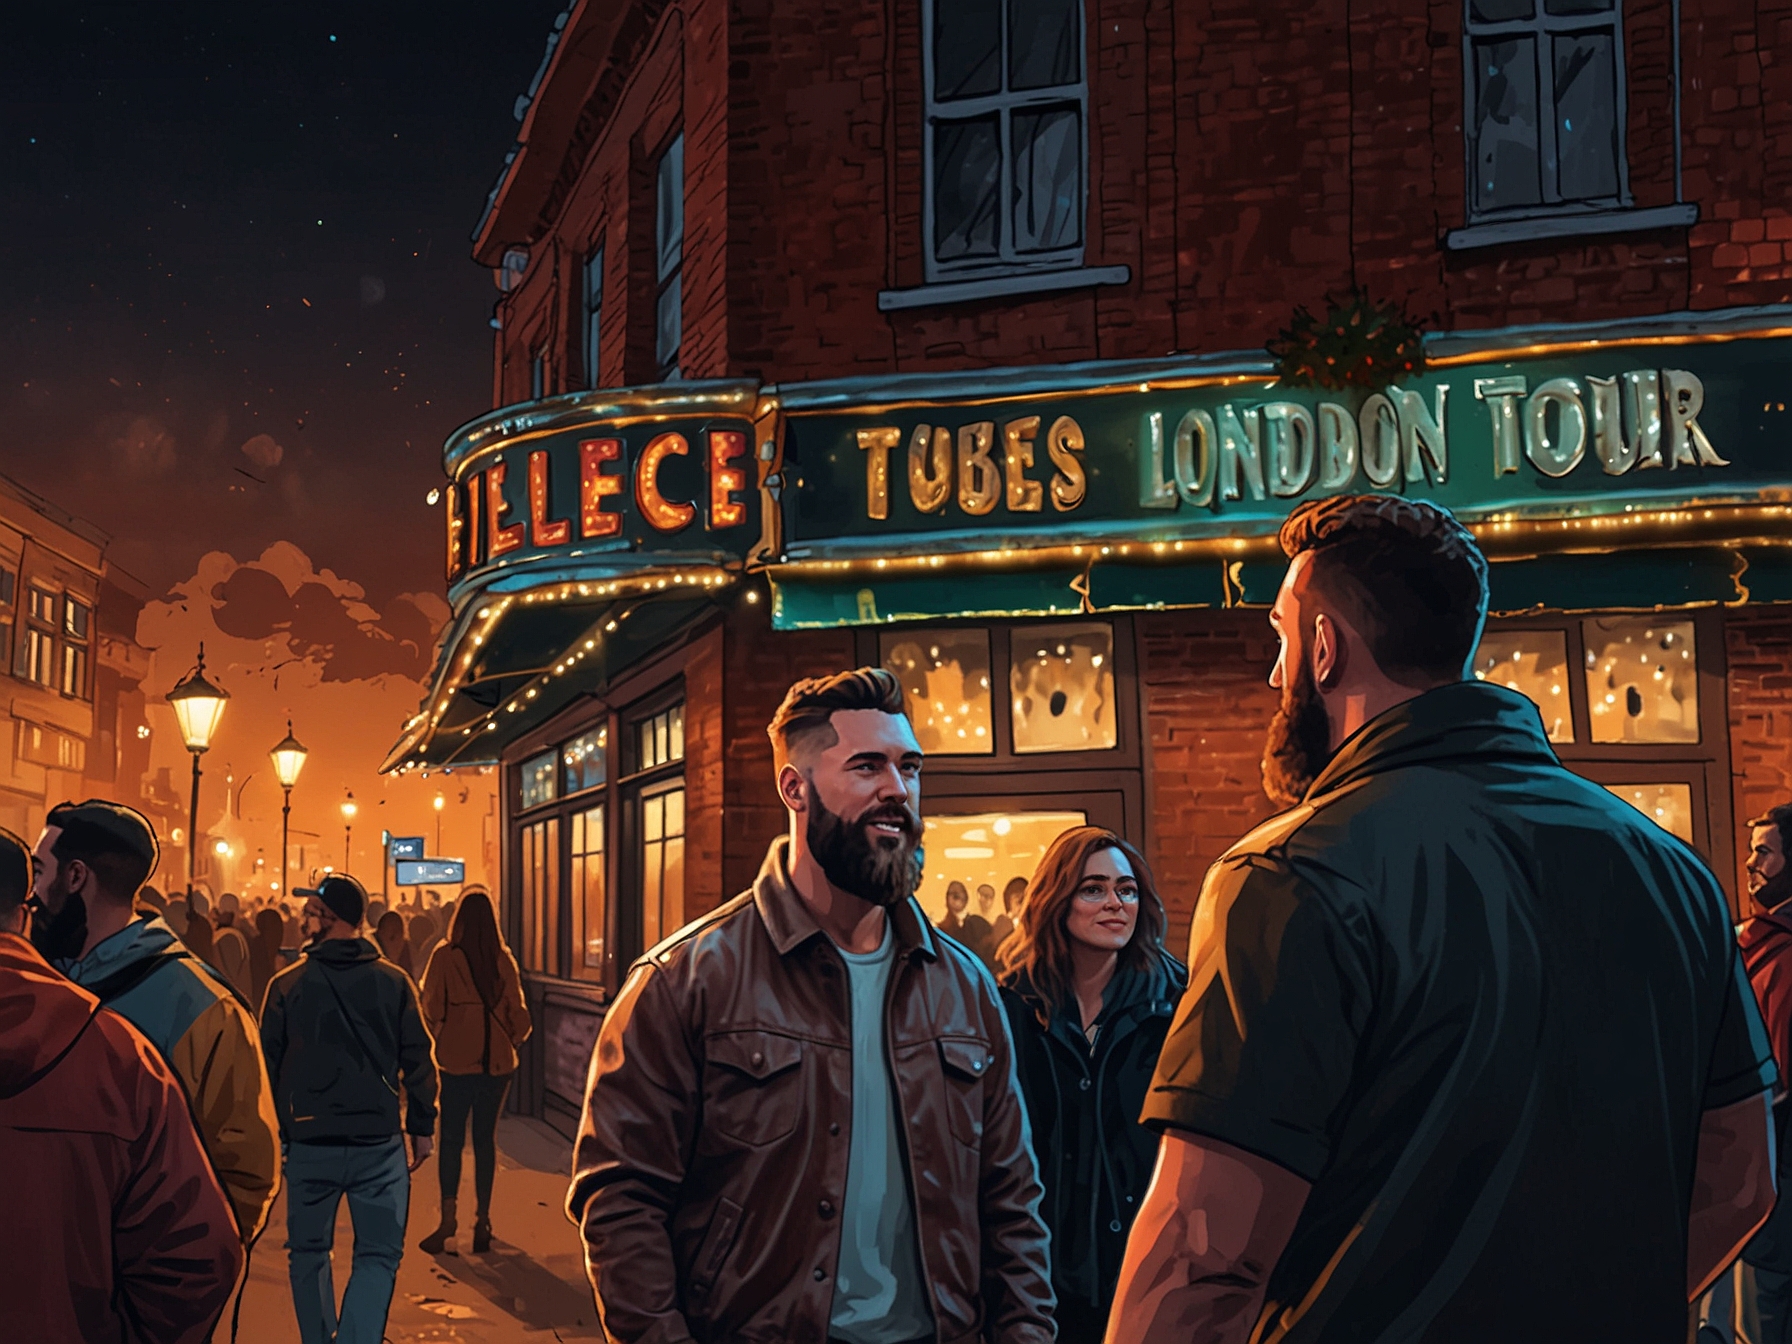 Travis Kelce, Jason Kelce, and Ed Kelce mingling with fans outside the London Eras Tour concert venue, showcasing the excitement and vibrant atmosphere surrounding the event.